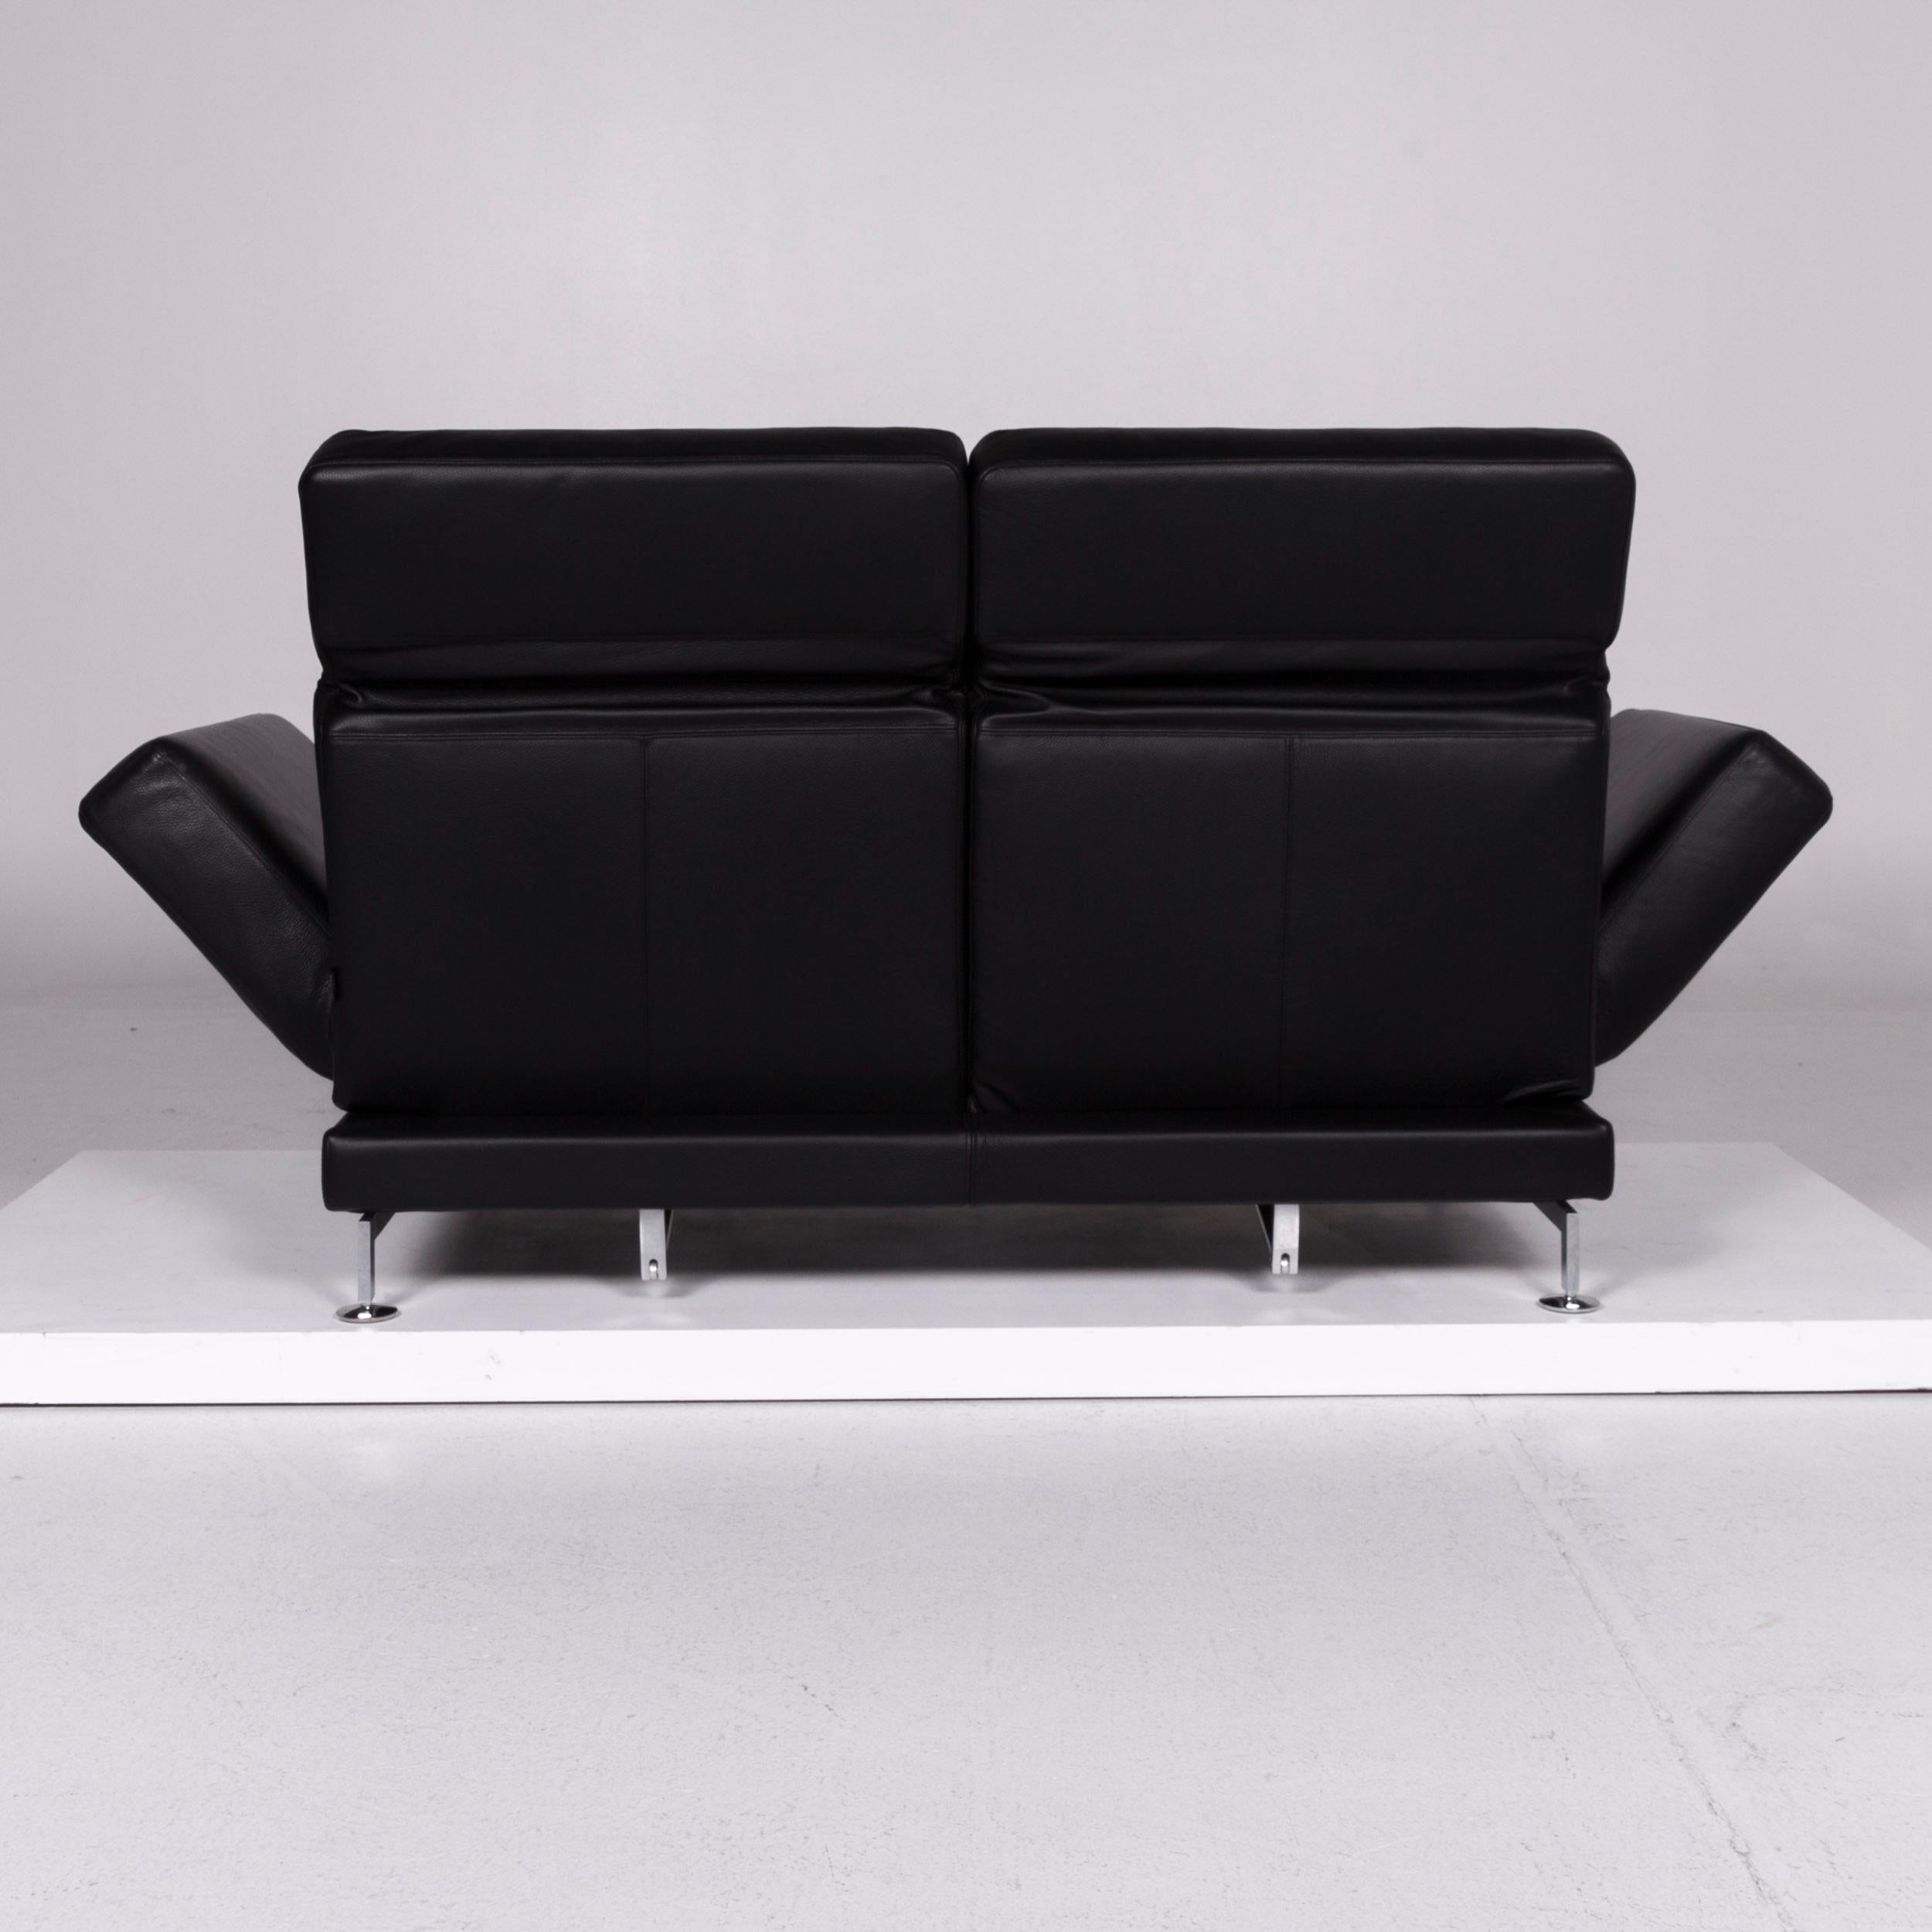 Brühl & Sippold Moule Leather Sofa Black Two-Seat Include Function For Sale 4